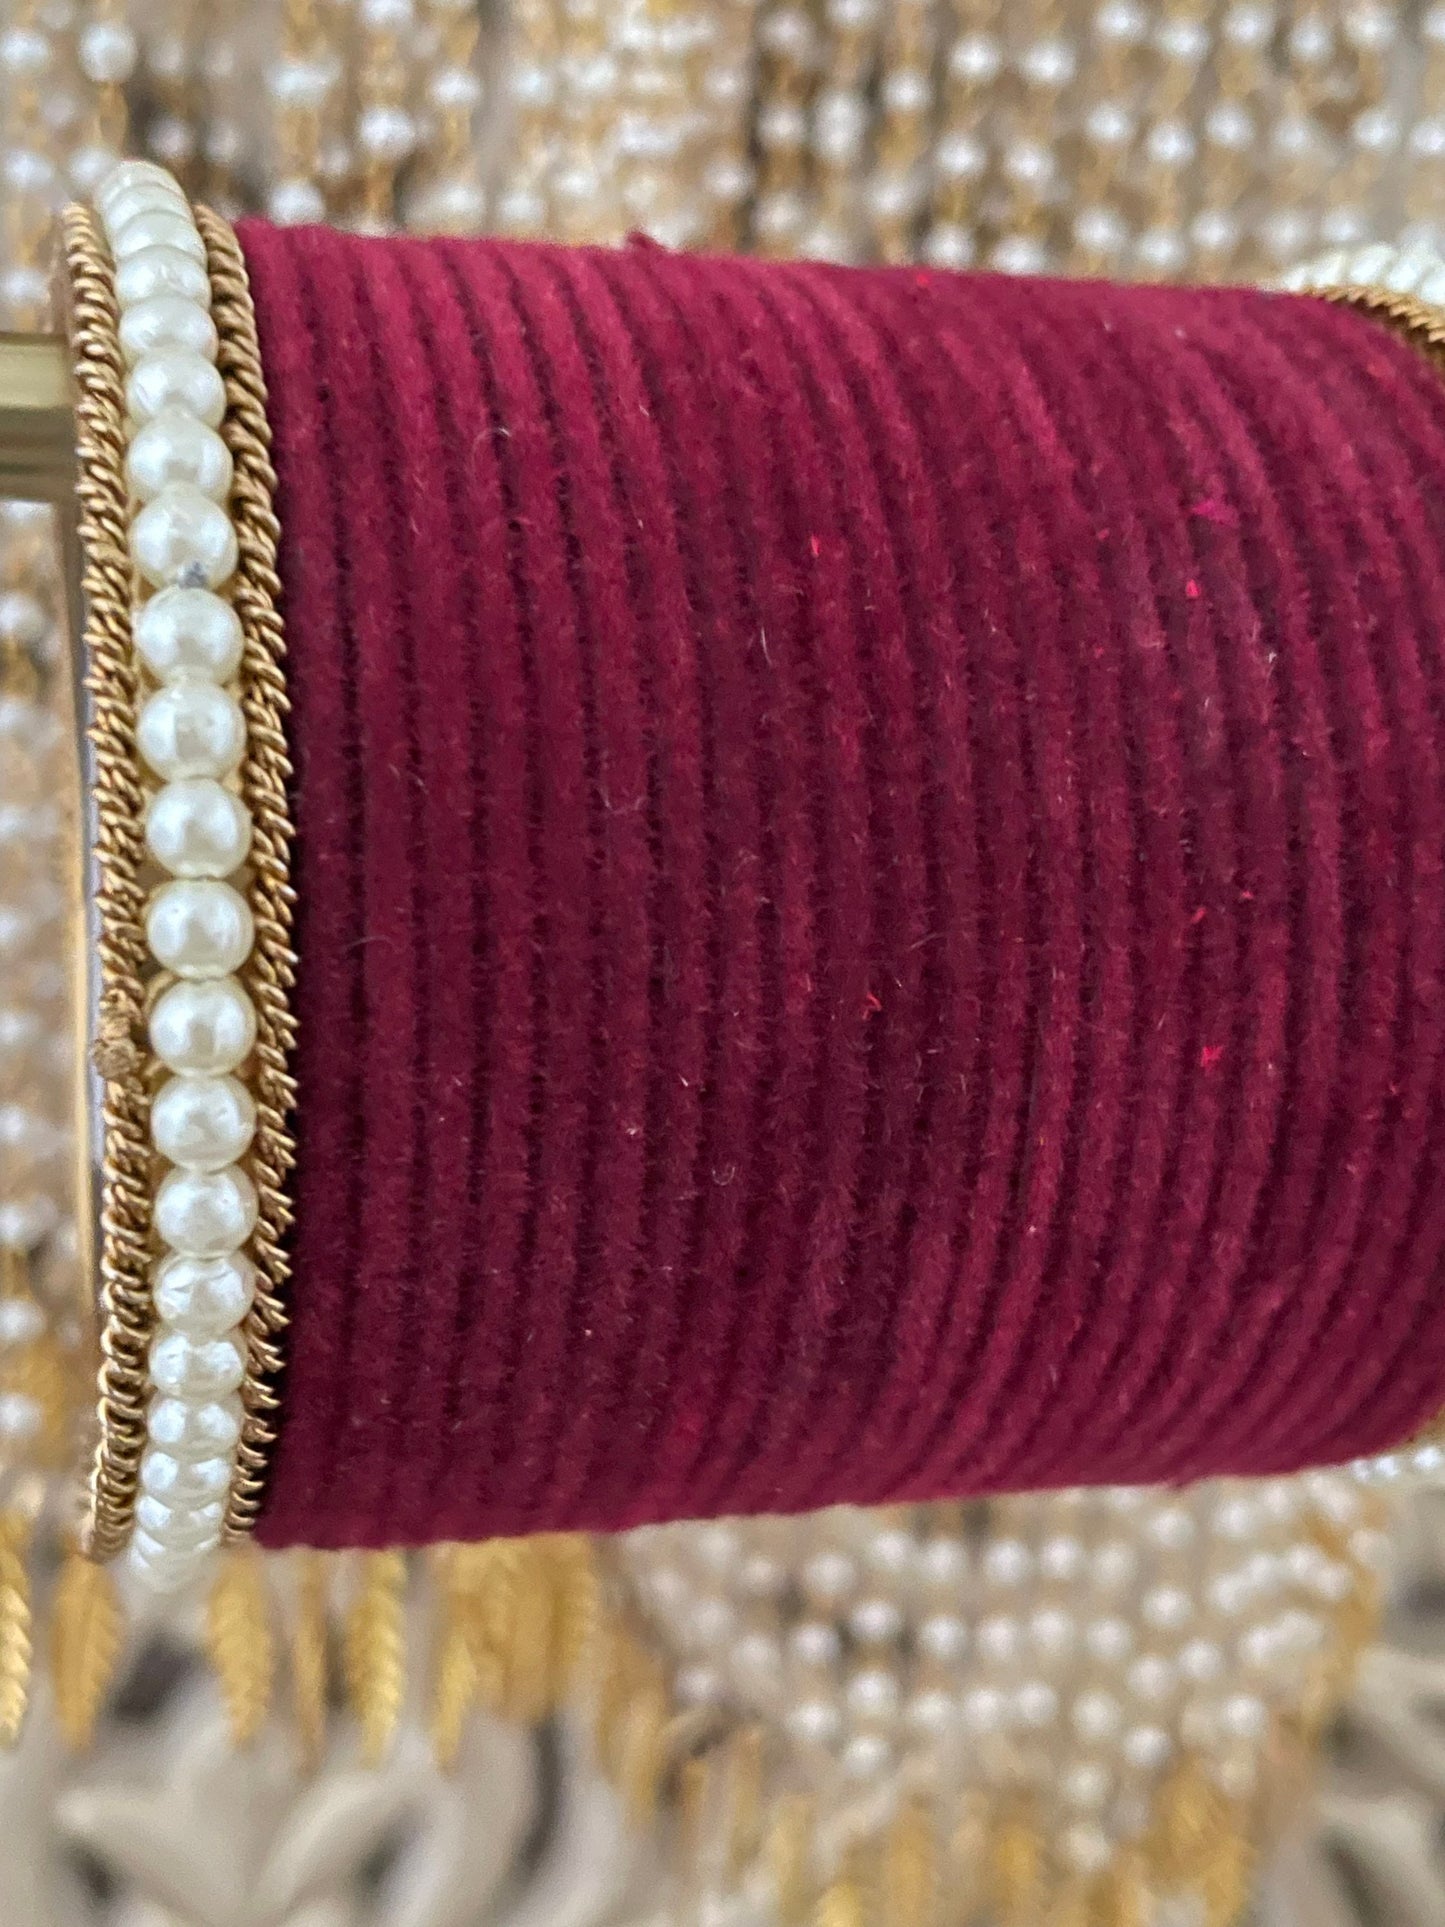 Simple Elegant Velvet & Pearl Bangle Stack for two hands| Indian Jewellery Wedding| 28 bangles in the set